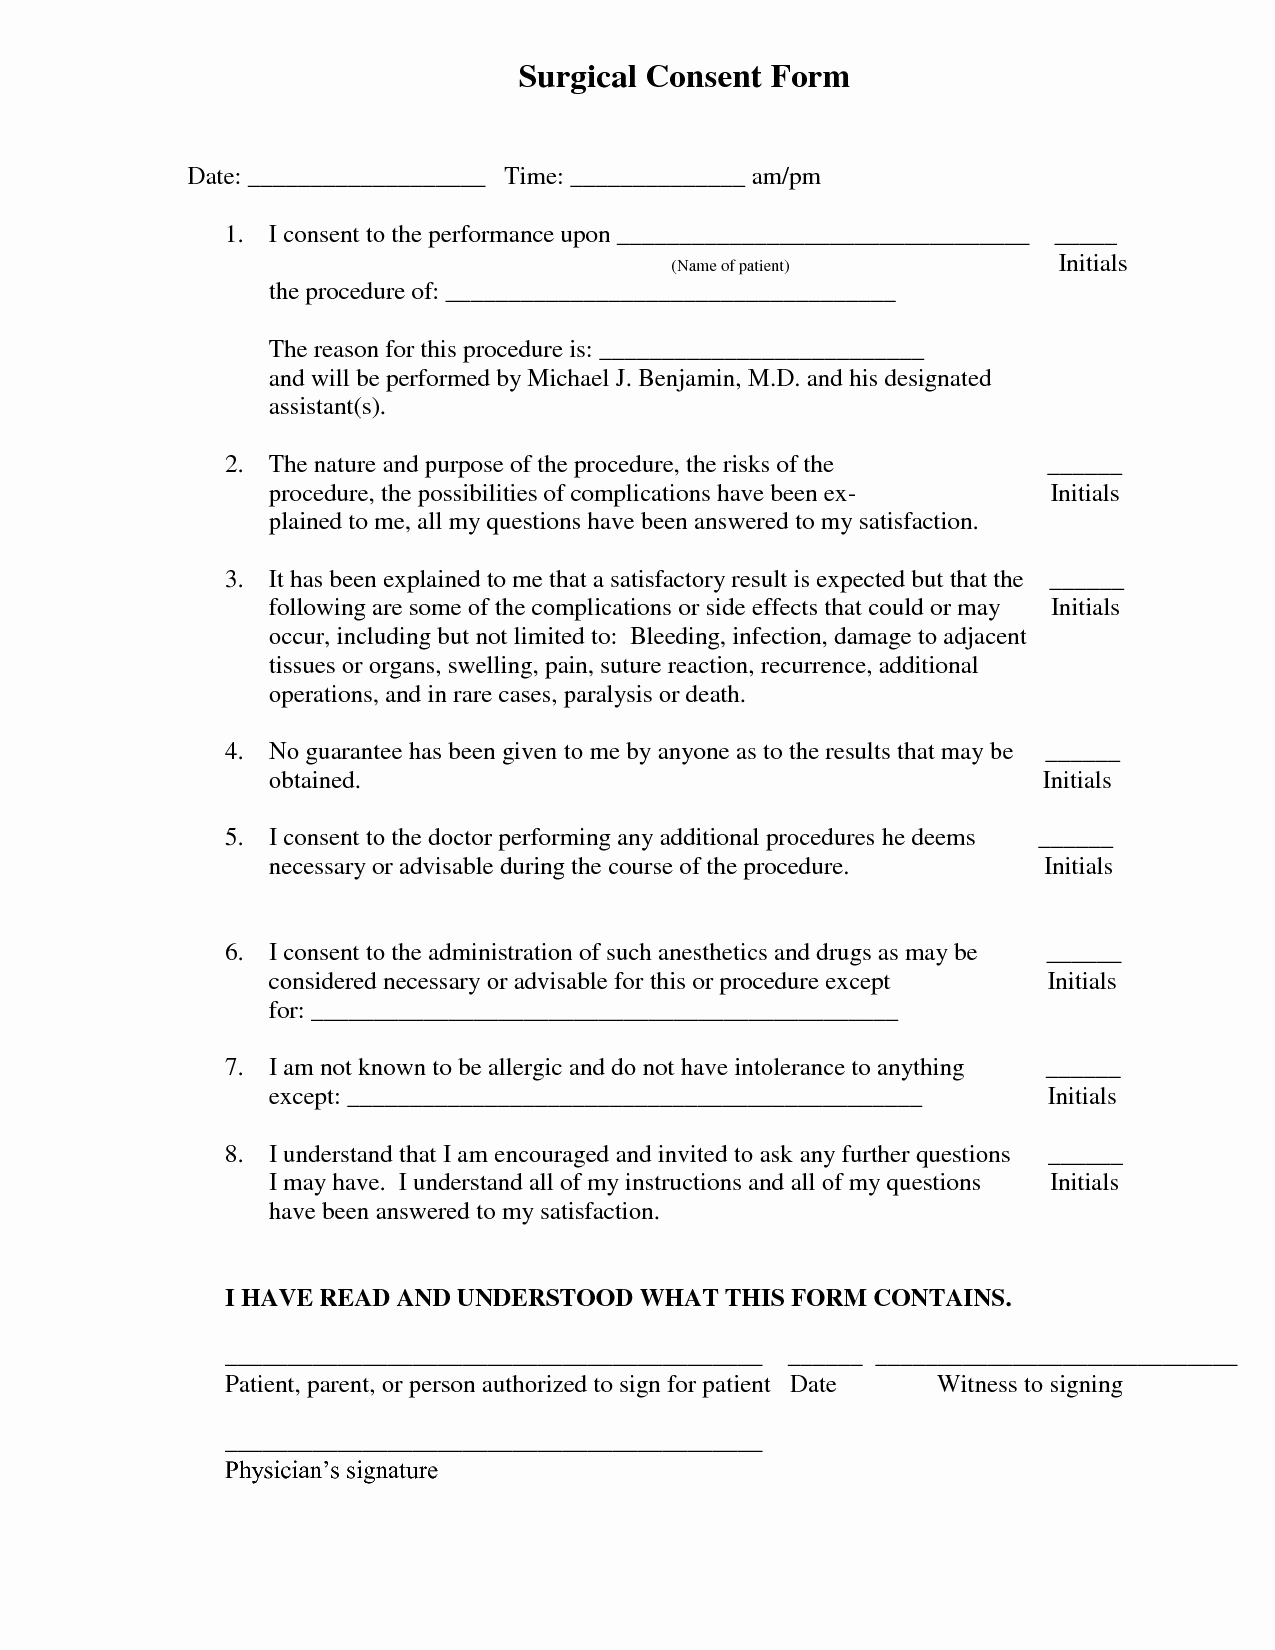 Photo Consent form Template Fresh Surgical Consent form Template Consent form